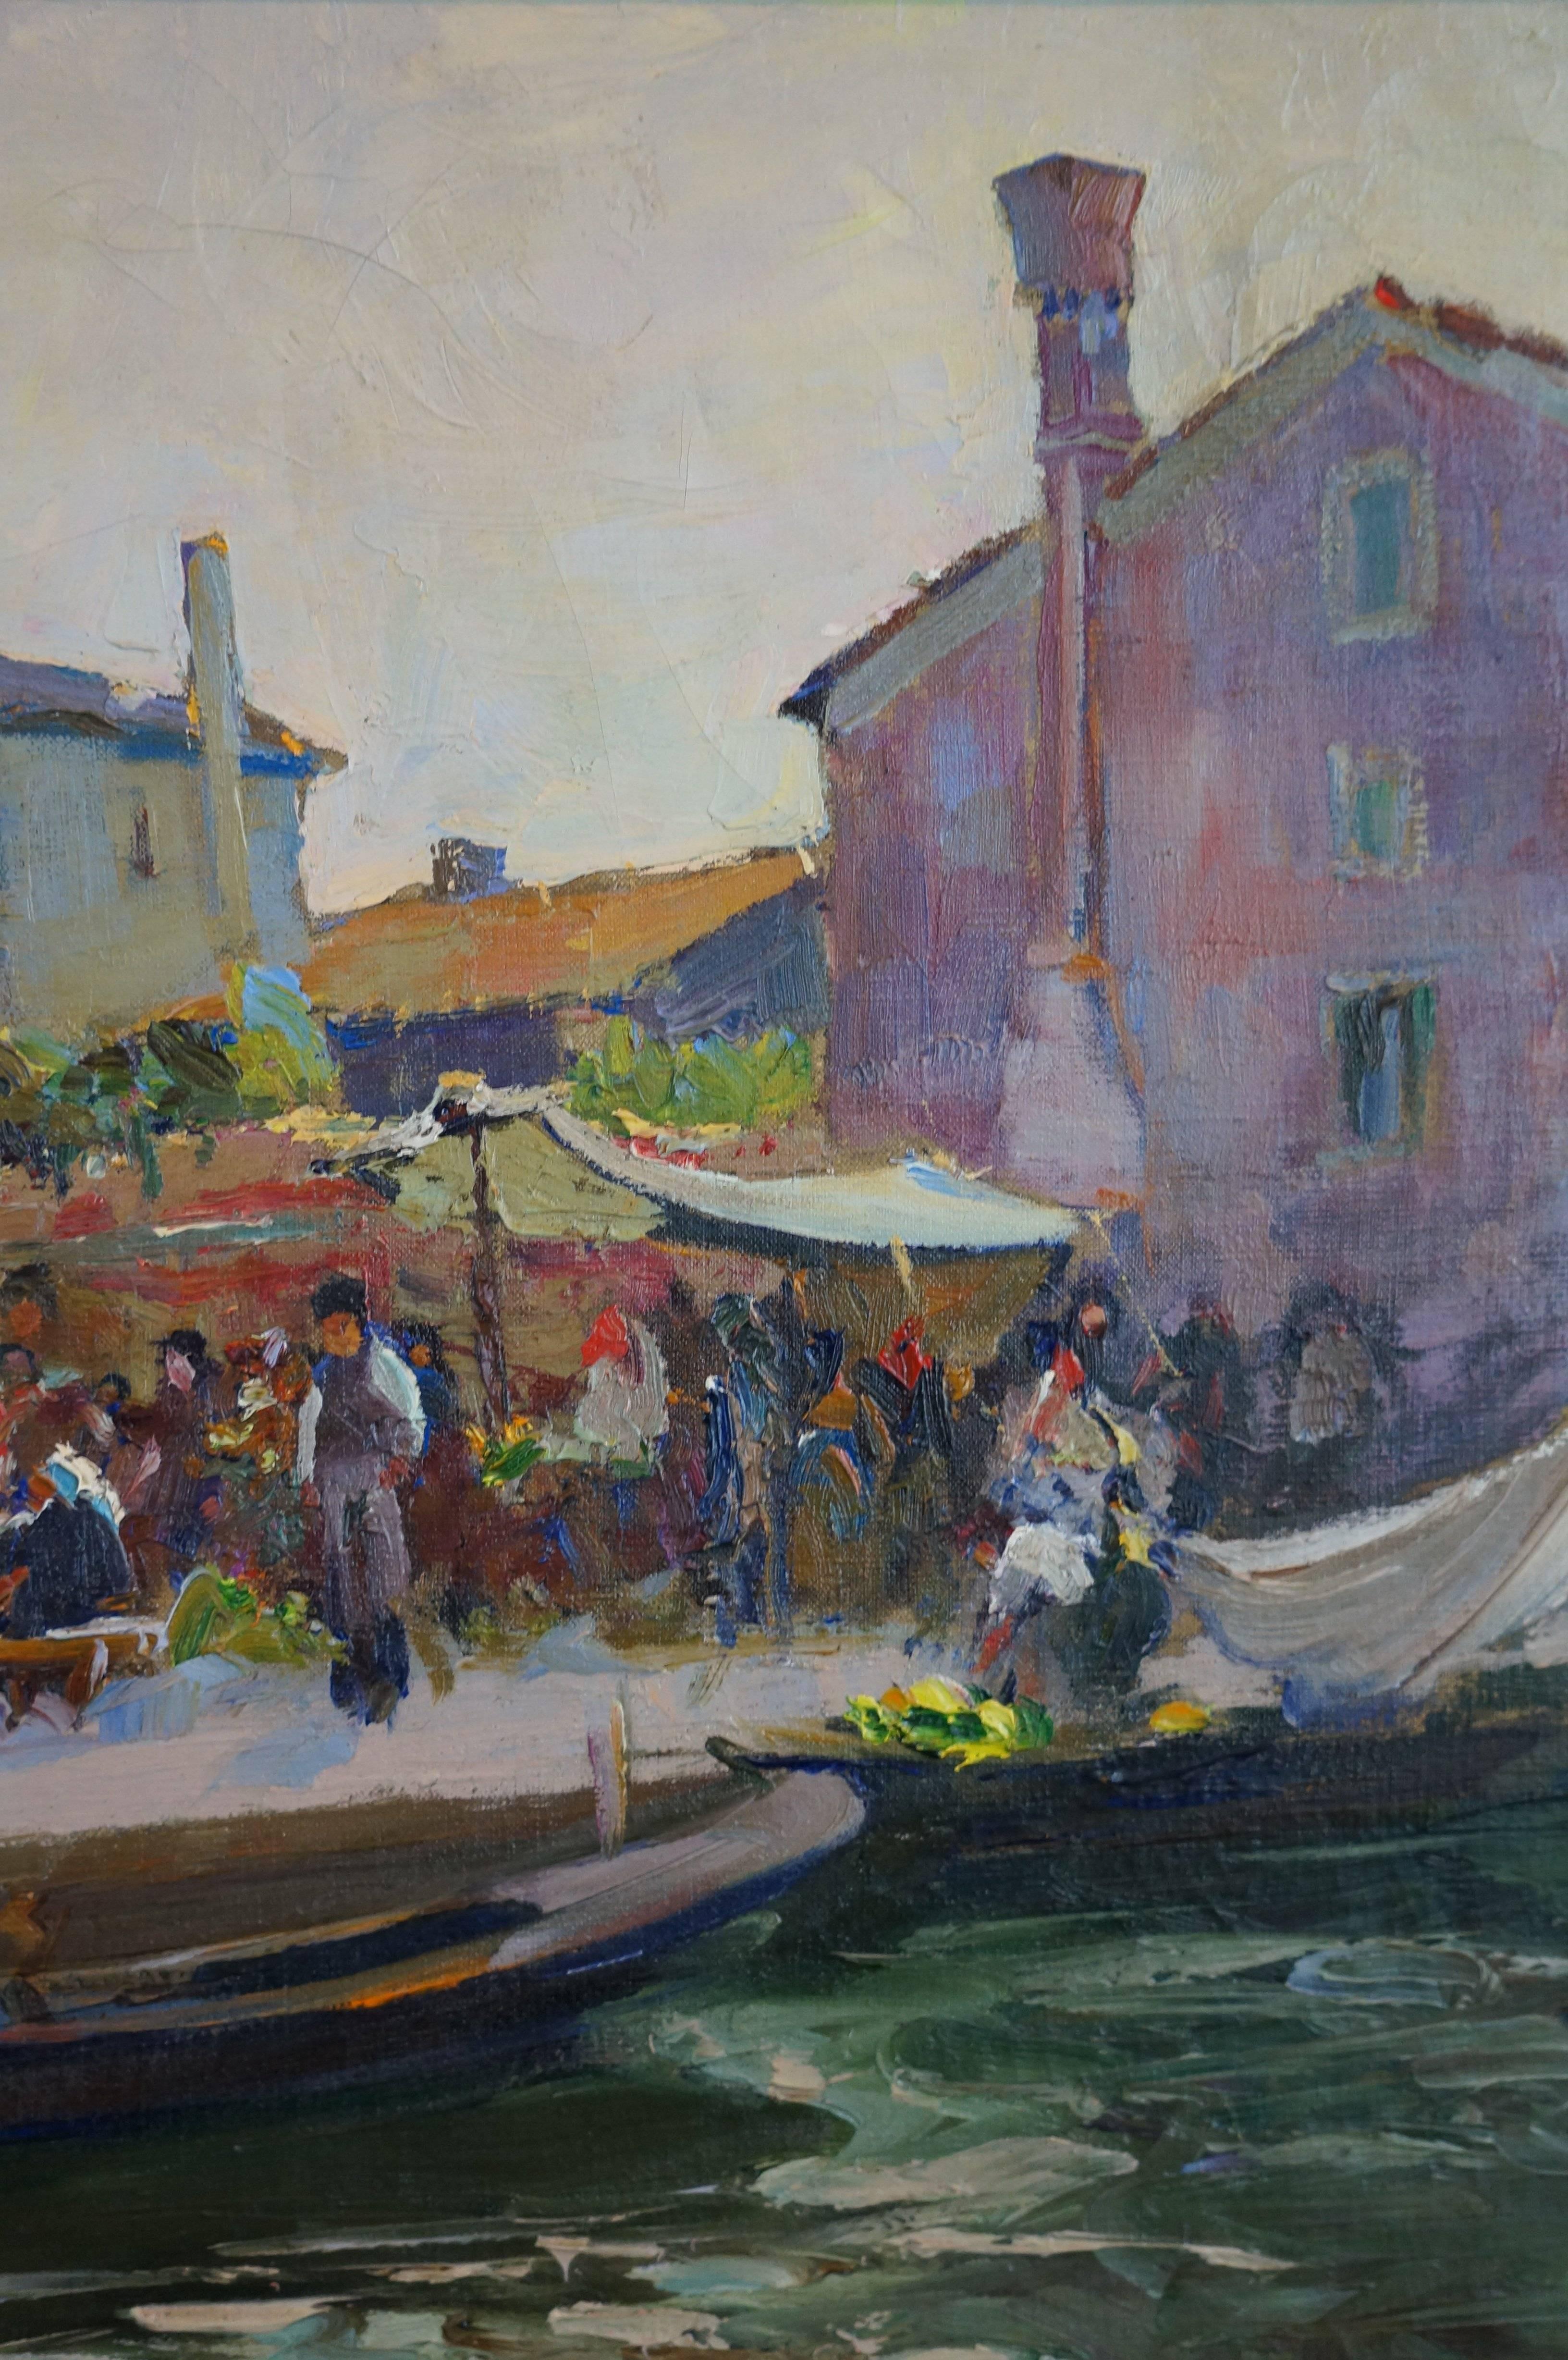 The Market - Impressionist Painting by Fantini Philippe